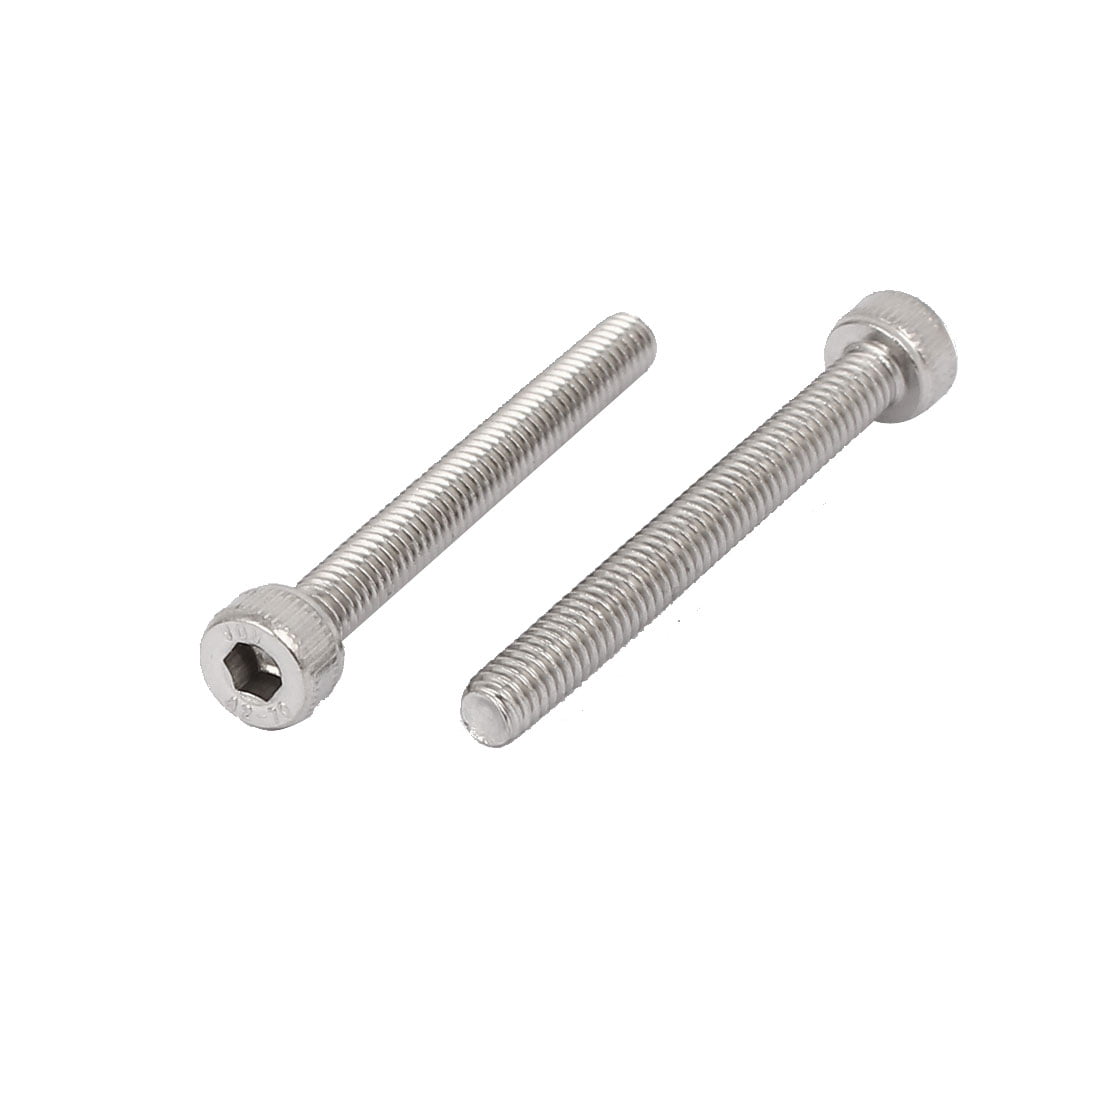 M4x30mm Nuts and Bolts 304 Stainless Steel Hex Socket Head Cap Screws and Nuts M4x30MM